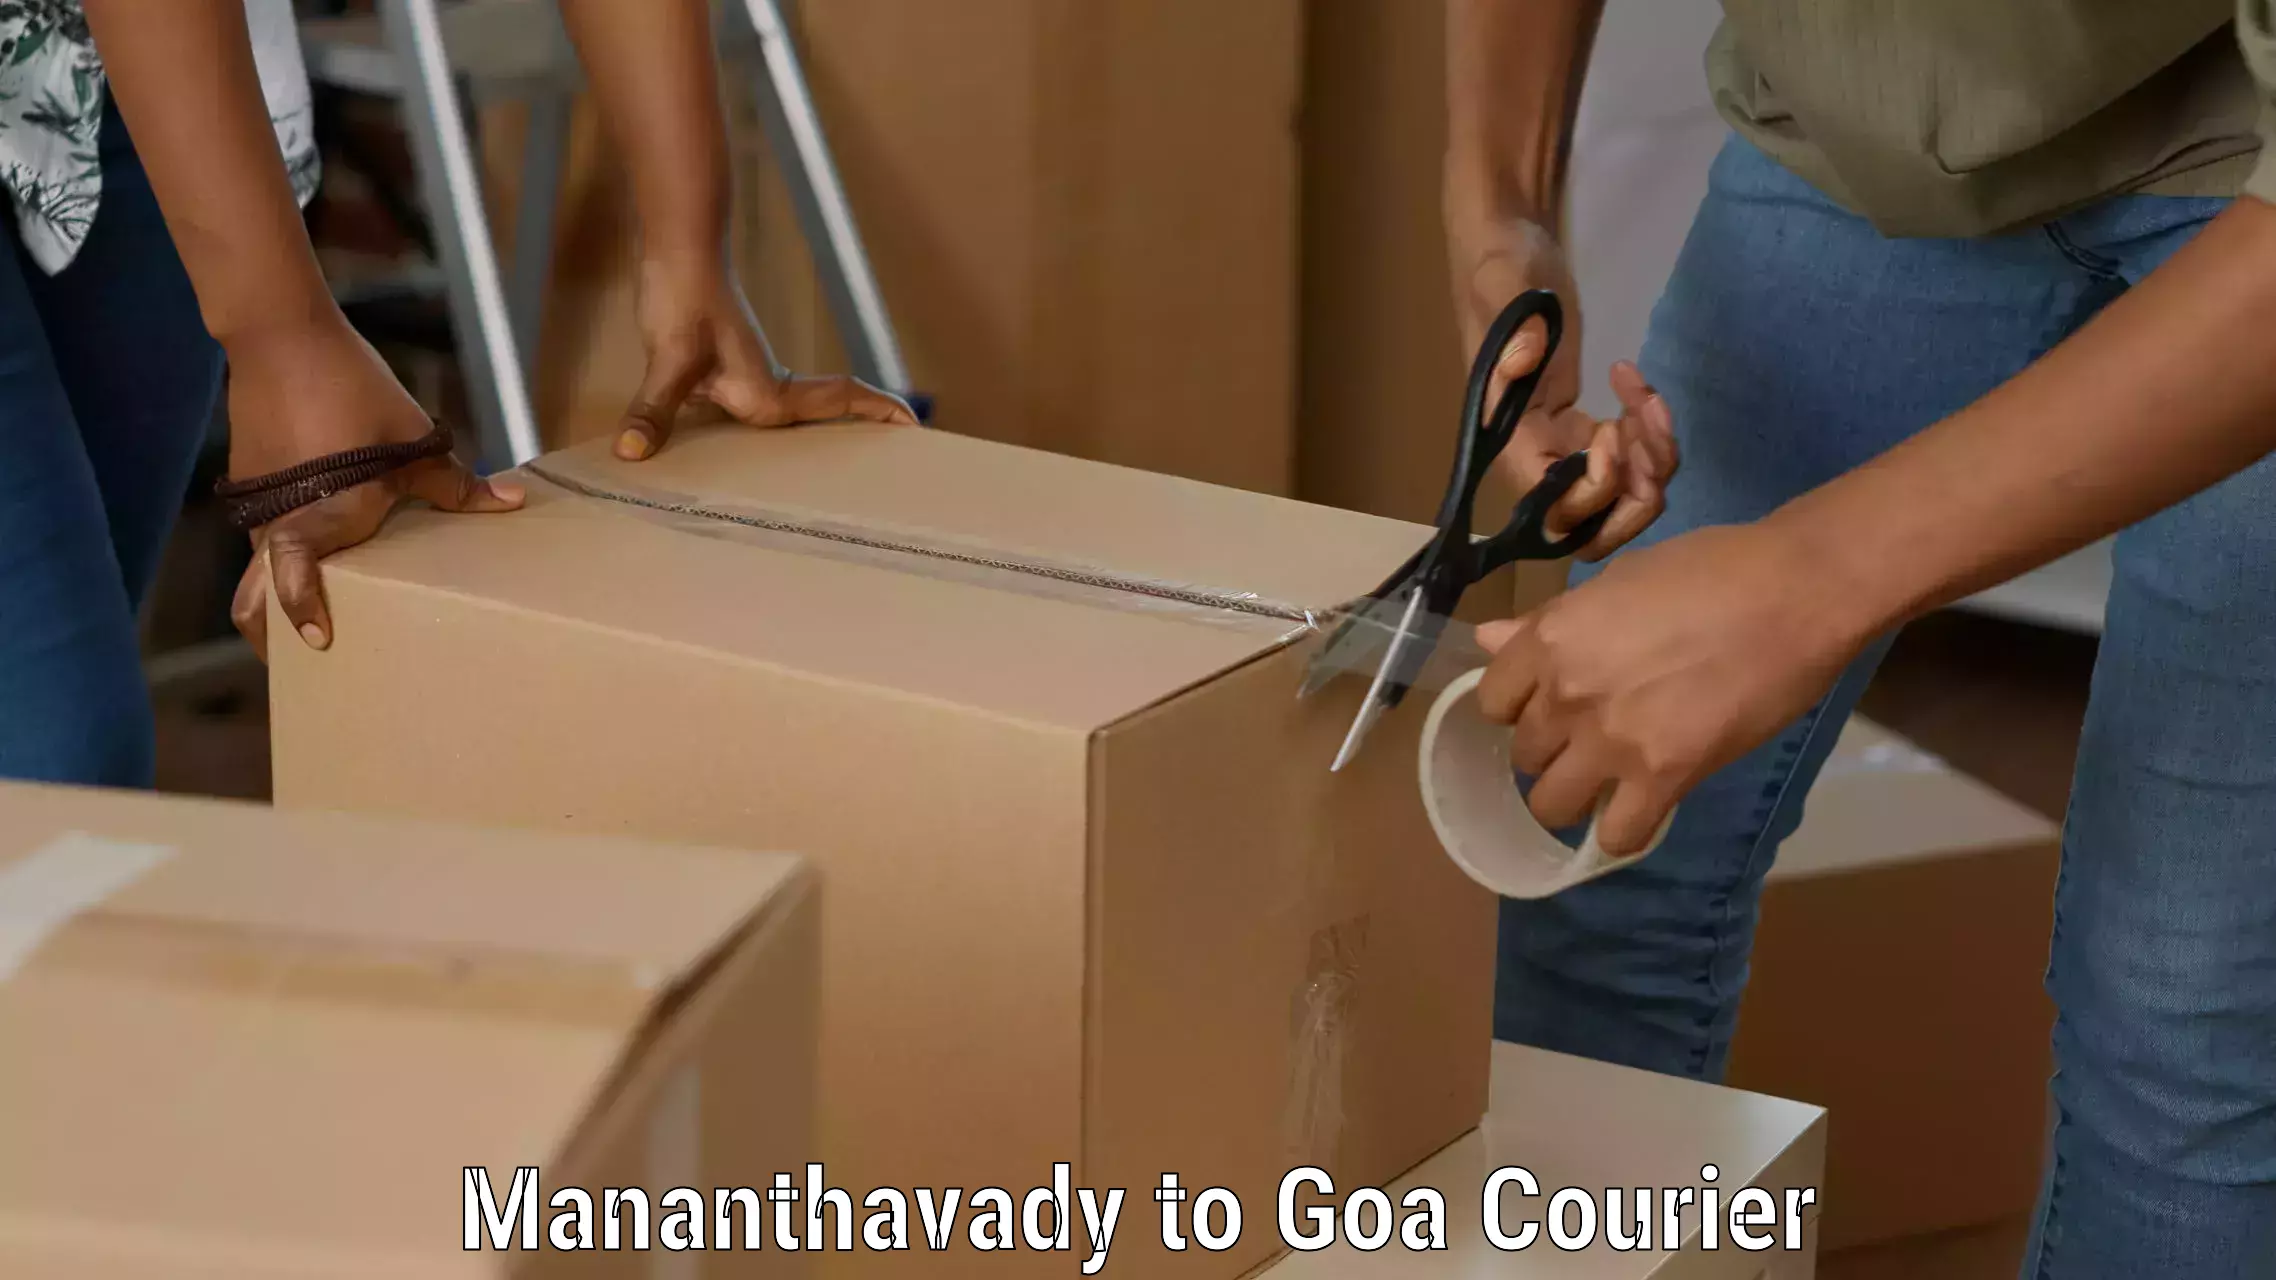 Courier service partnerships Mananthavady to Panaji